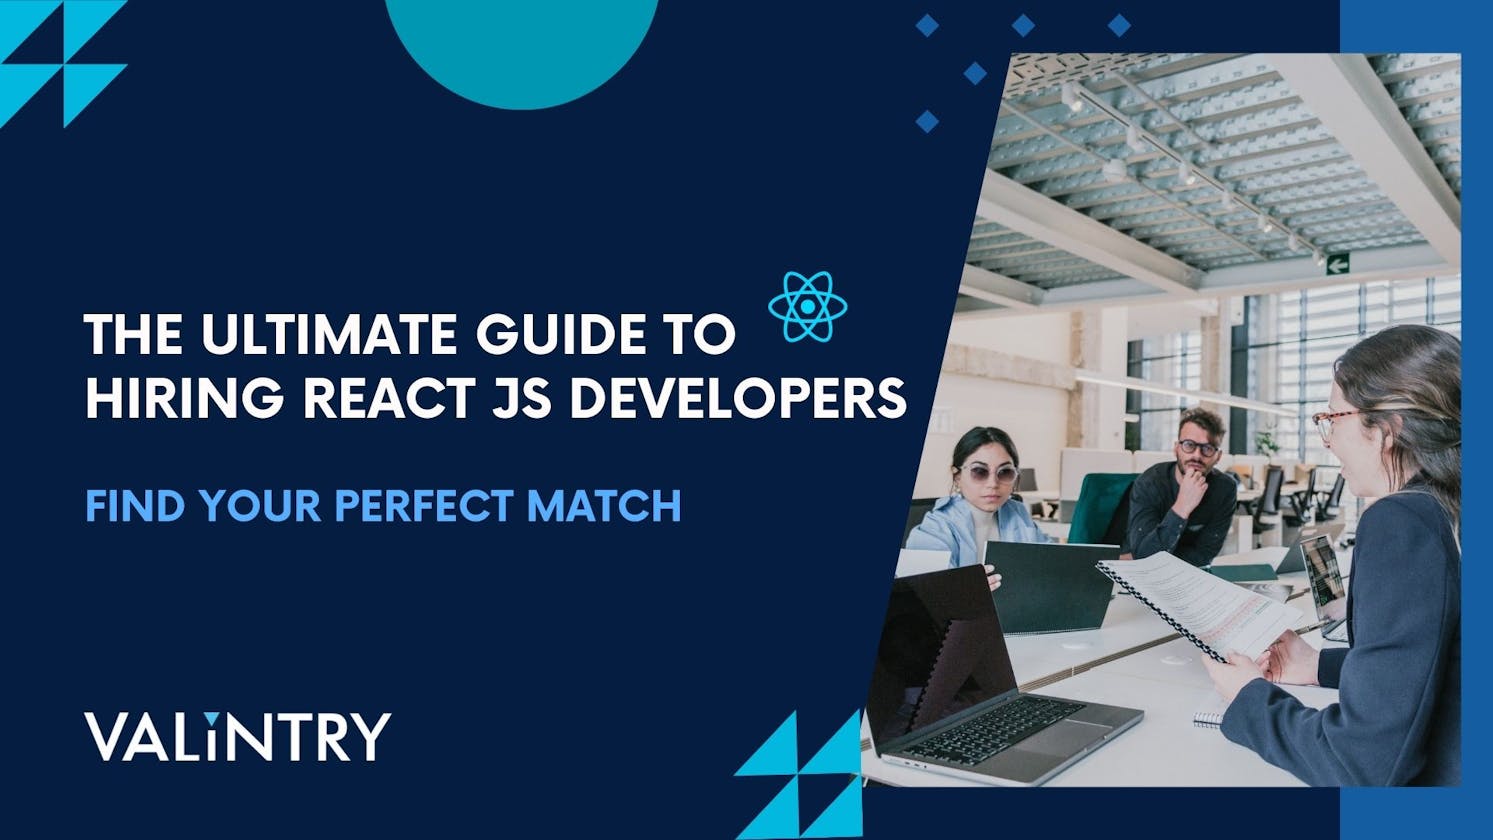 The Ultimate Guide to Hiring React Js Developers: Find Your Perfect Match - VALiNTRY